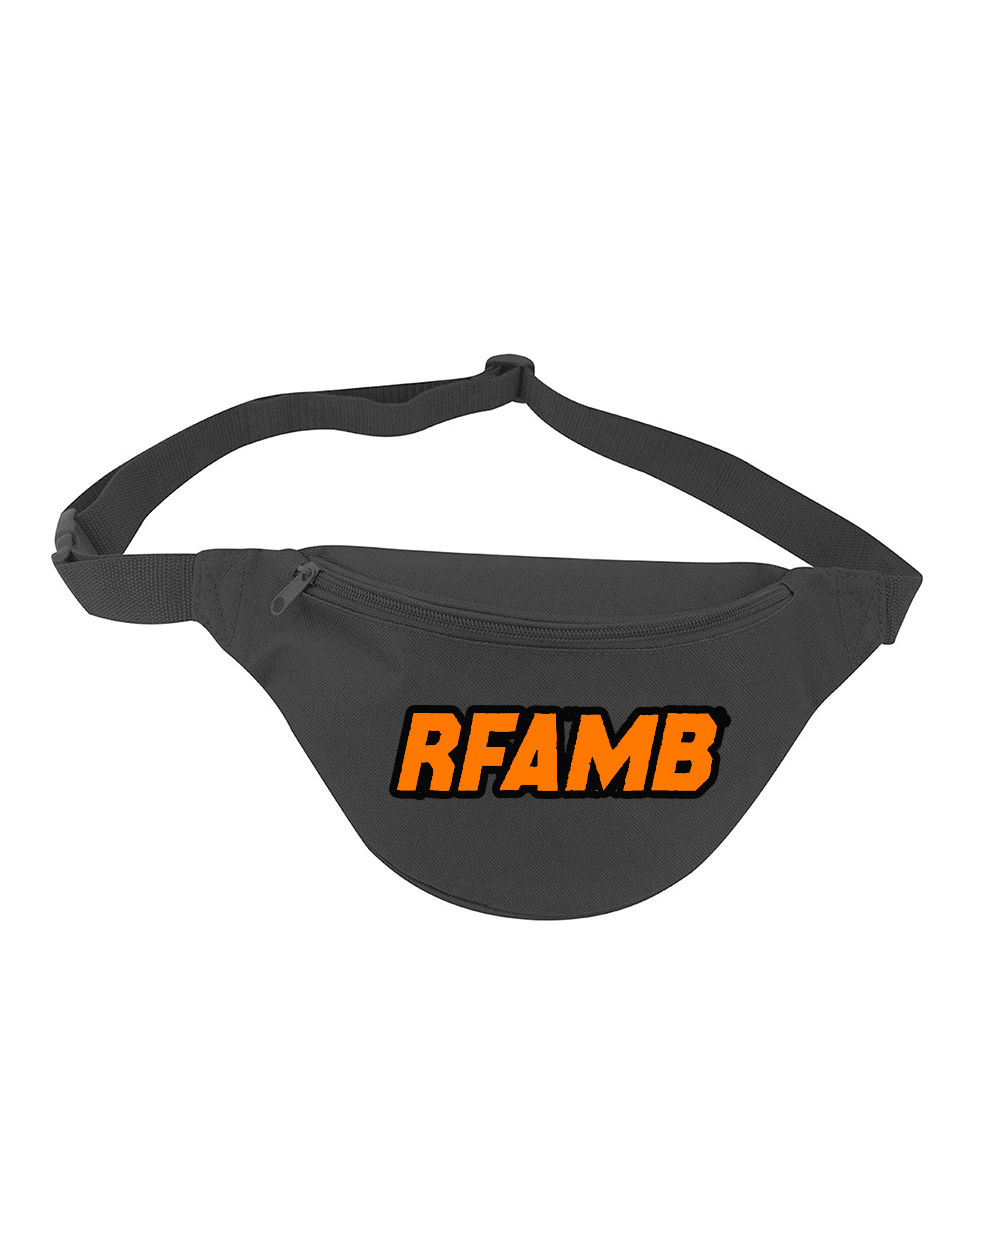 Black Fanny Pack with embroidered RFAMB logo